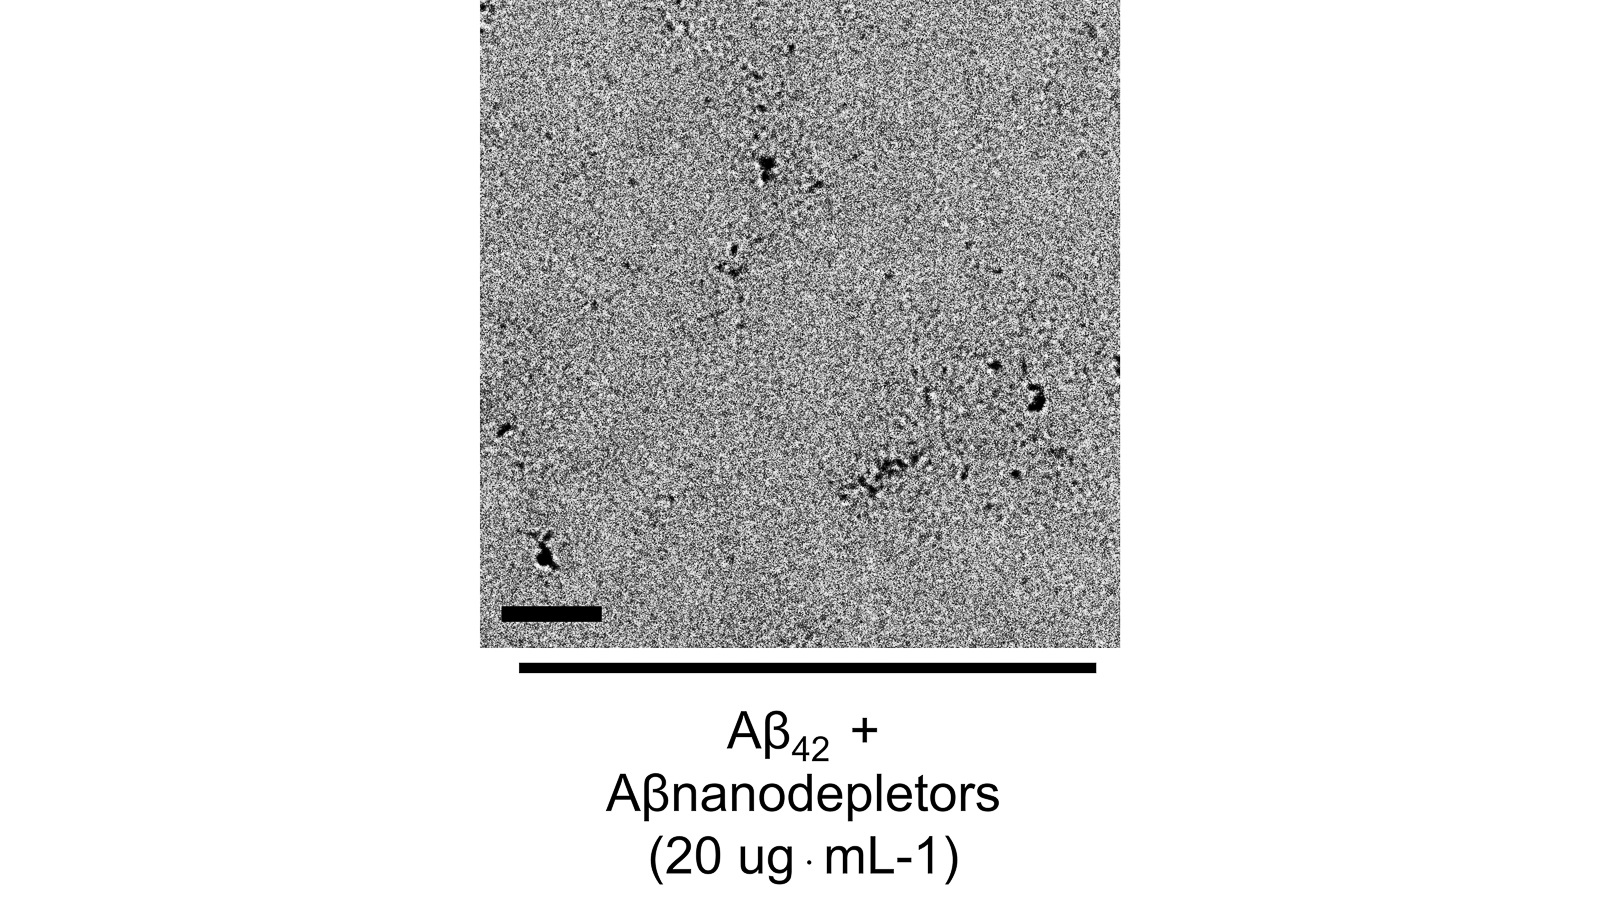 Transmission Electron Microscopy (TEM) images of Aβ peptide samples in the presence of the Aβ nanodevices (scale bar: 200 nm). The lack of grains in the image indicates the effectiveness of the nanodevice in trapping the peptides. (Image by Argonne’s Center for Nanoscale Materials.)